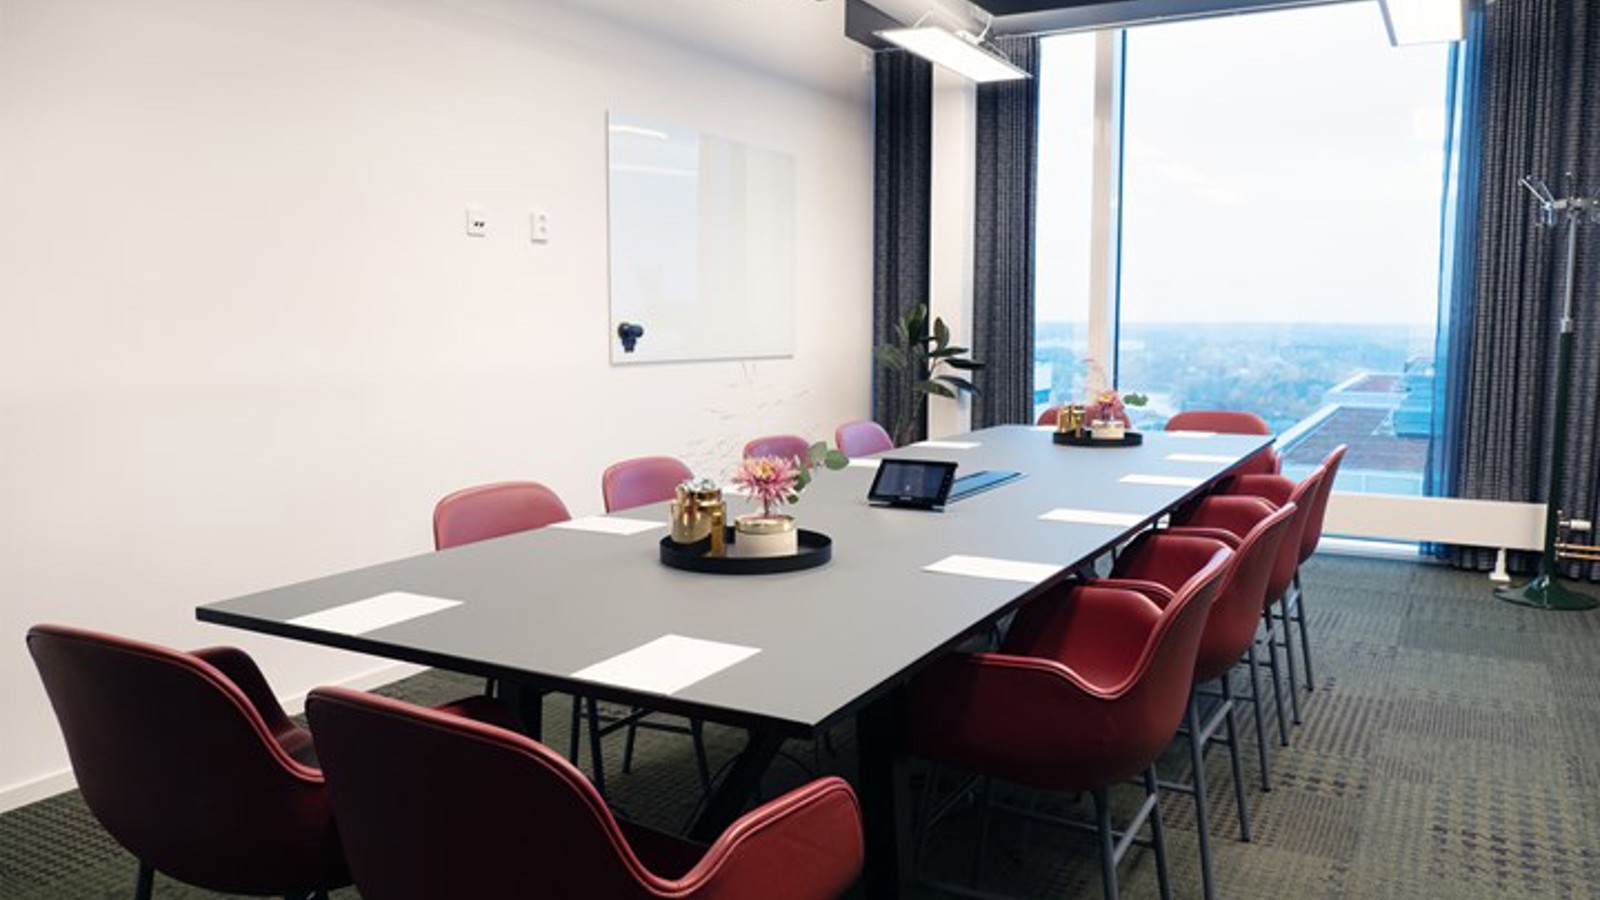 Conference room with board seating, red chairs, black table and large window